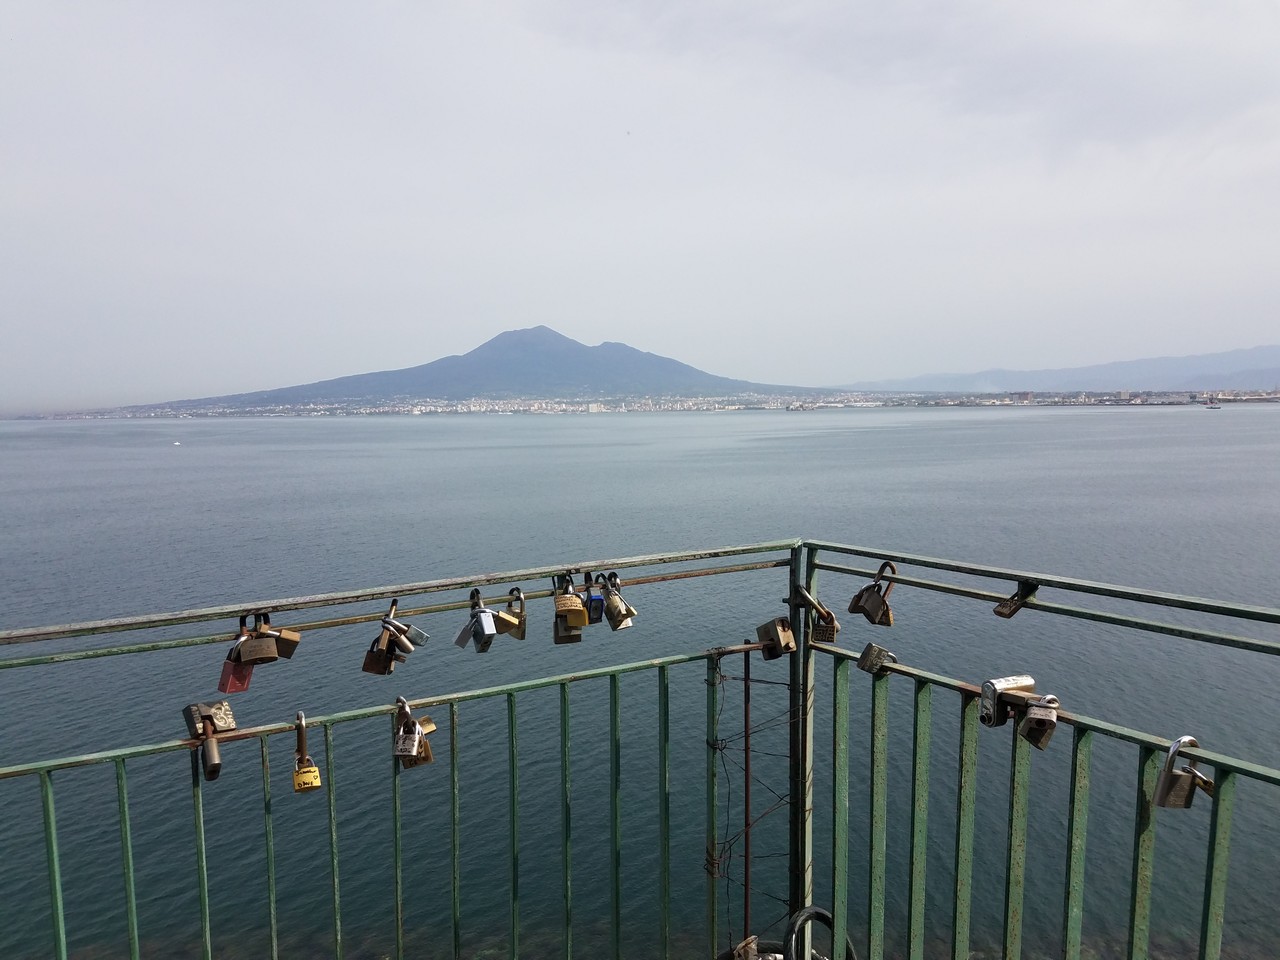 a bridge with locks on railing over water